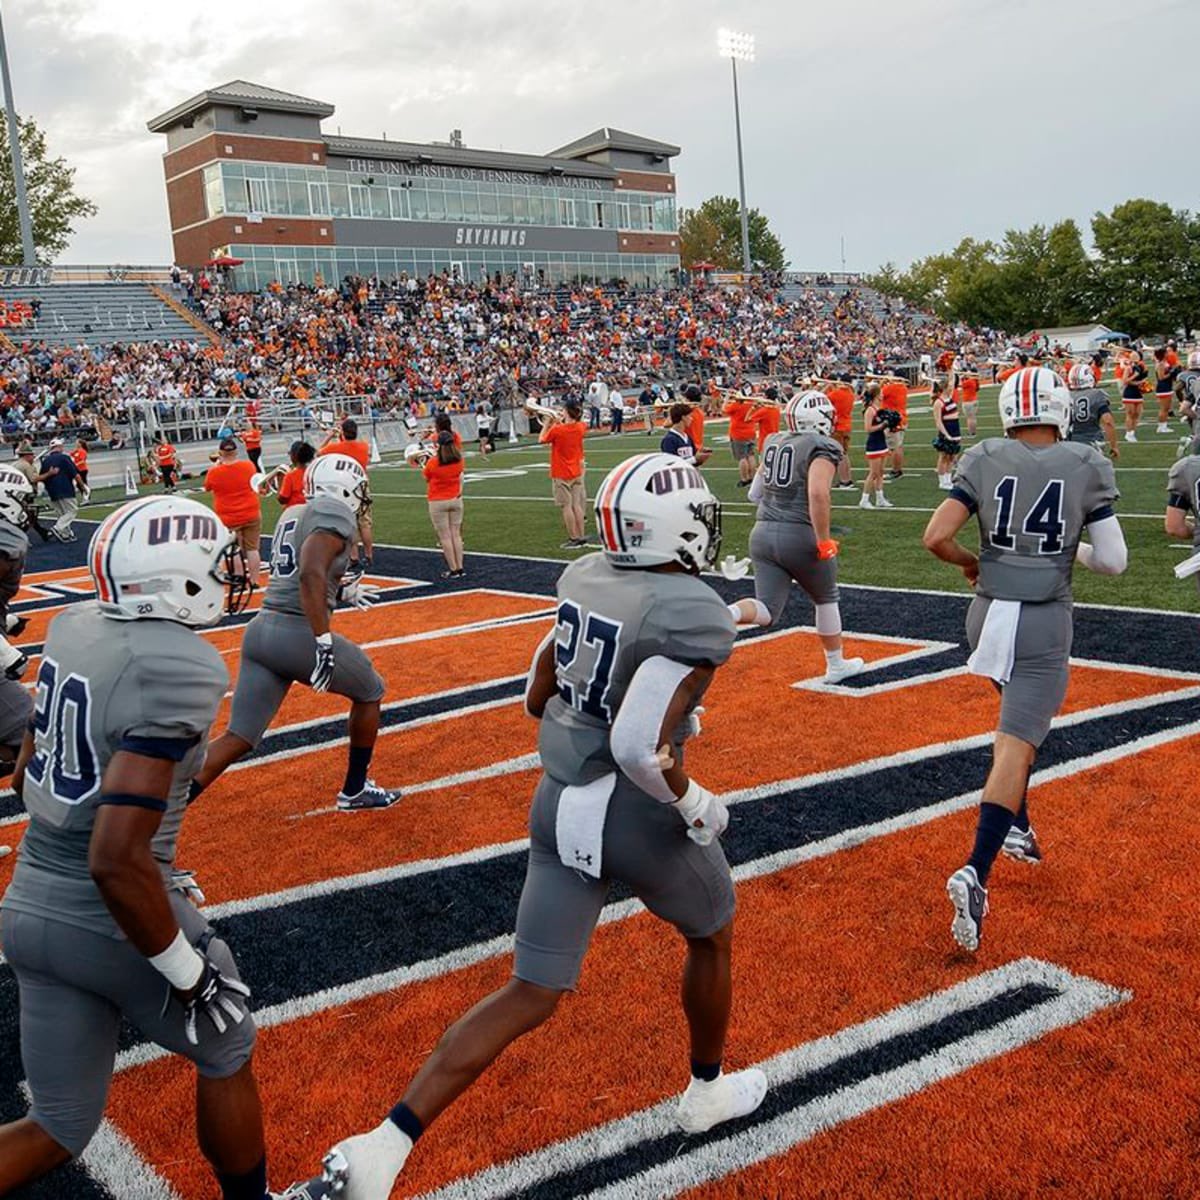 after a great conversation with @CoachFee615 I am blessed to receive another d1 offer from UT Martin @tv2p @CoachAGibbs @MacCorleone74 @ShedrickMckenz2 @MohrRecruiting @MarcusThornton @EricGray85